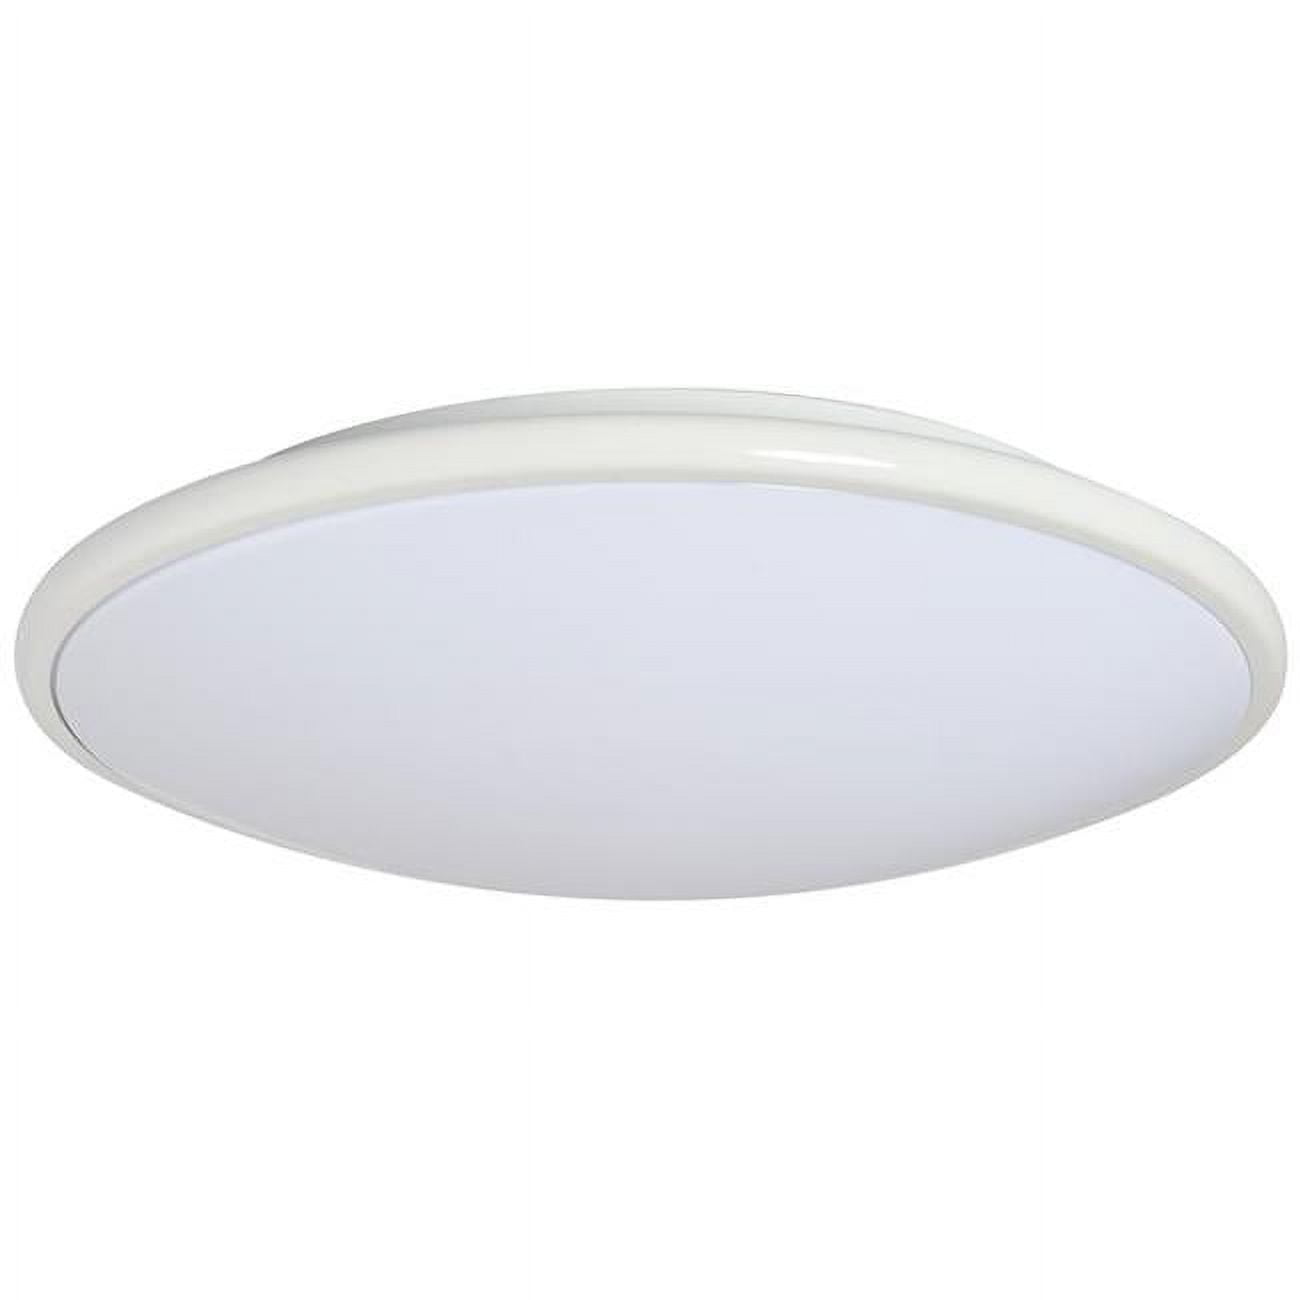 Led-m001lwht-w 13 X 3.5 In. Led Ceiling Fixture Saucer - White